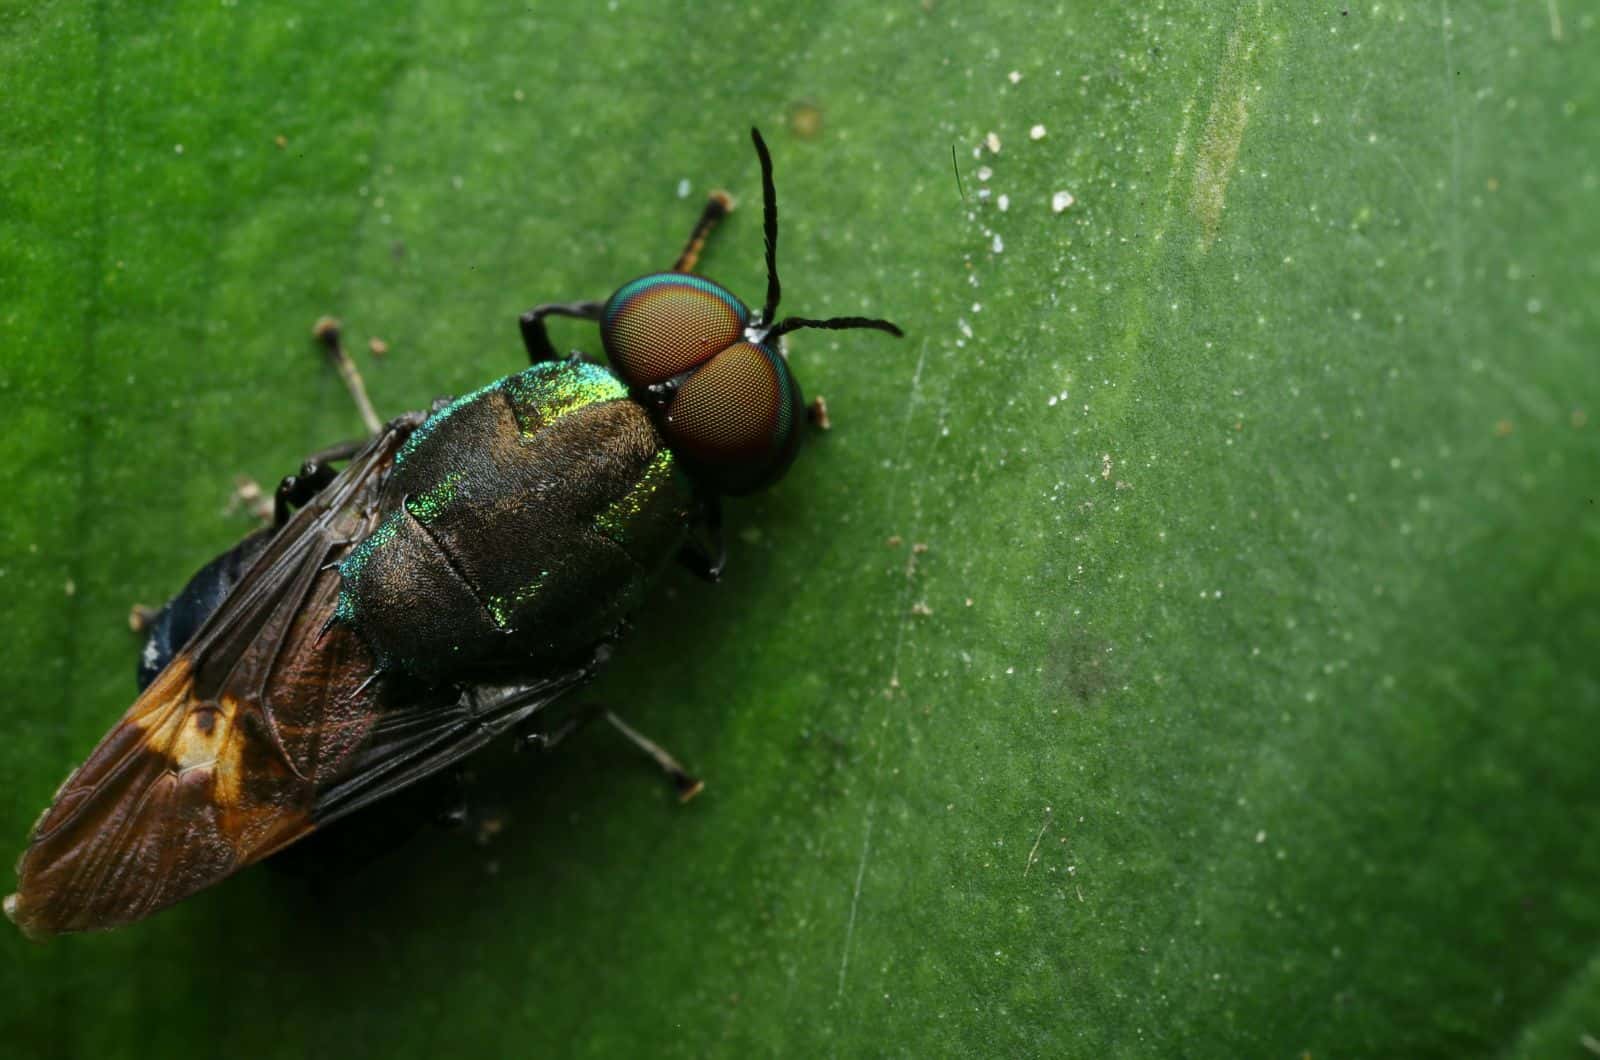 close shot of Plant Fly